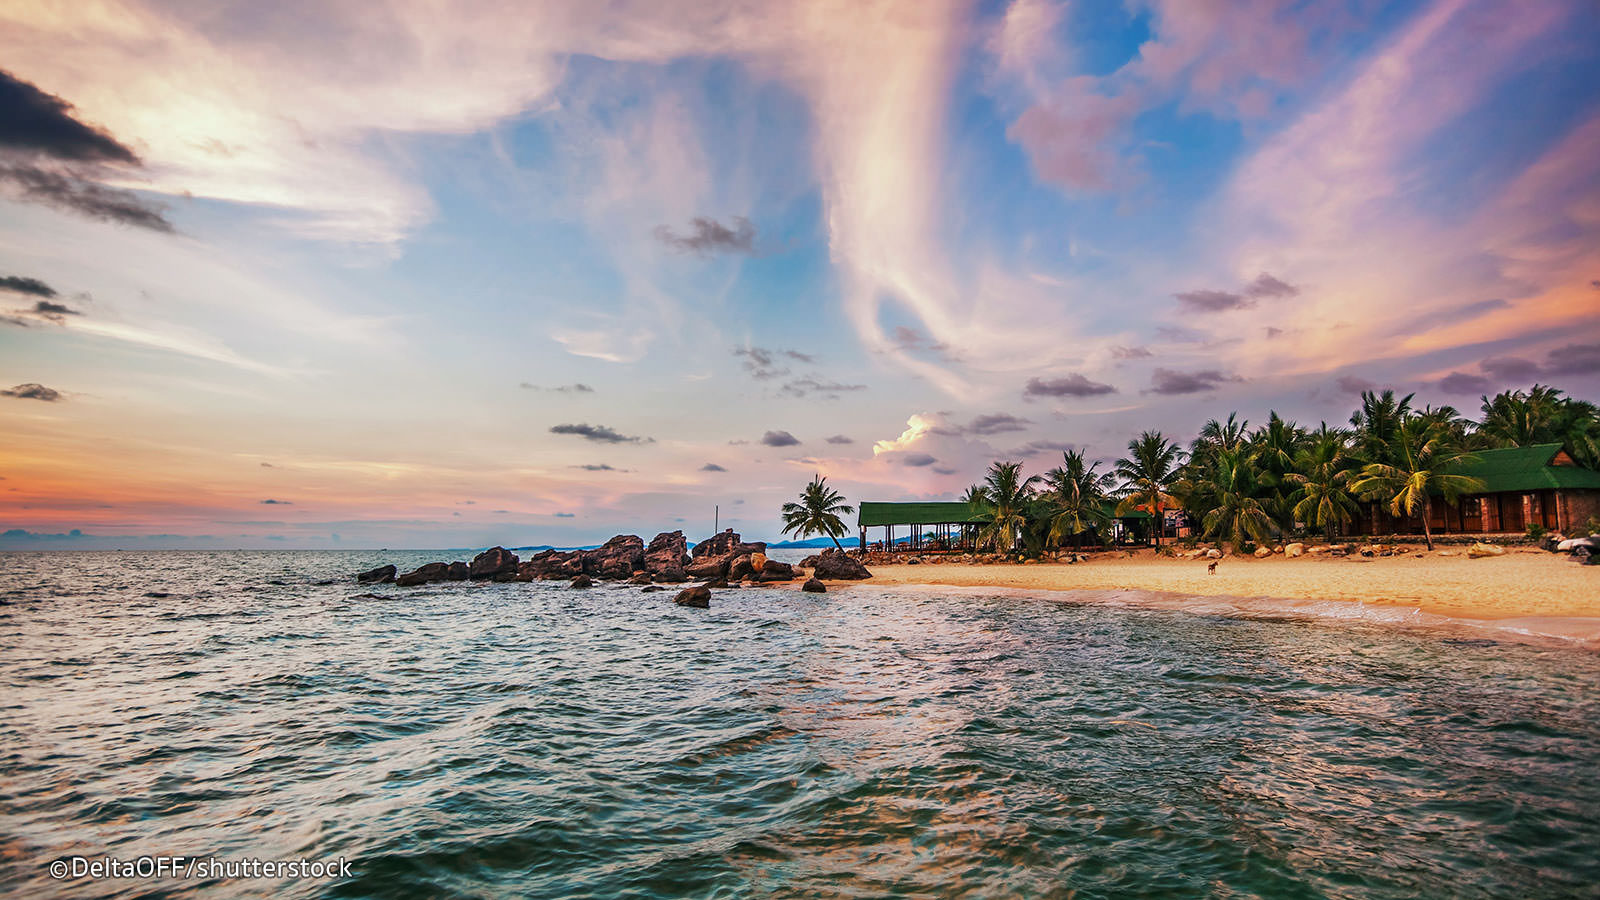 Phu Quoc Island: From the past 